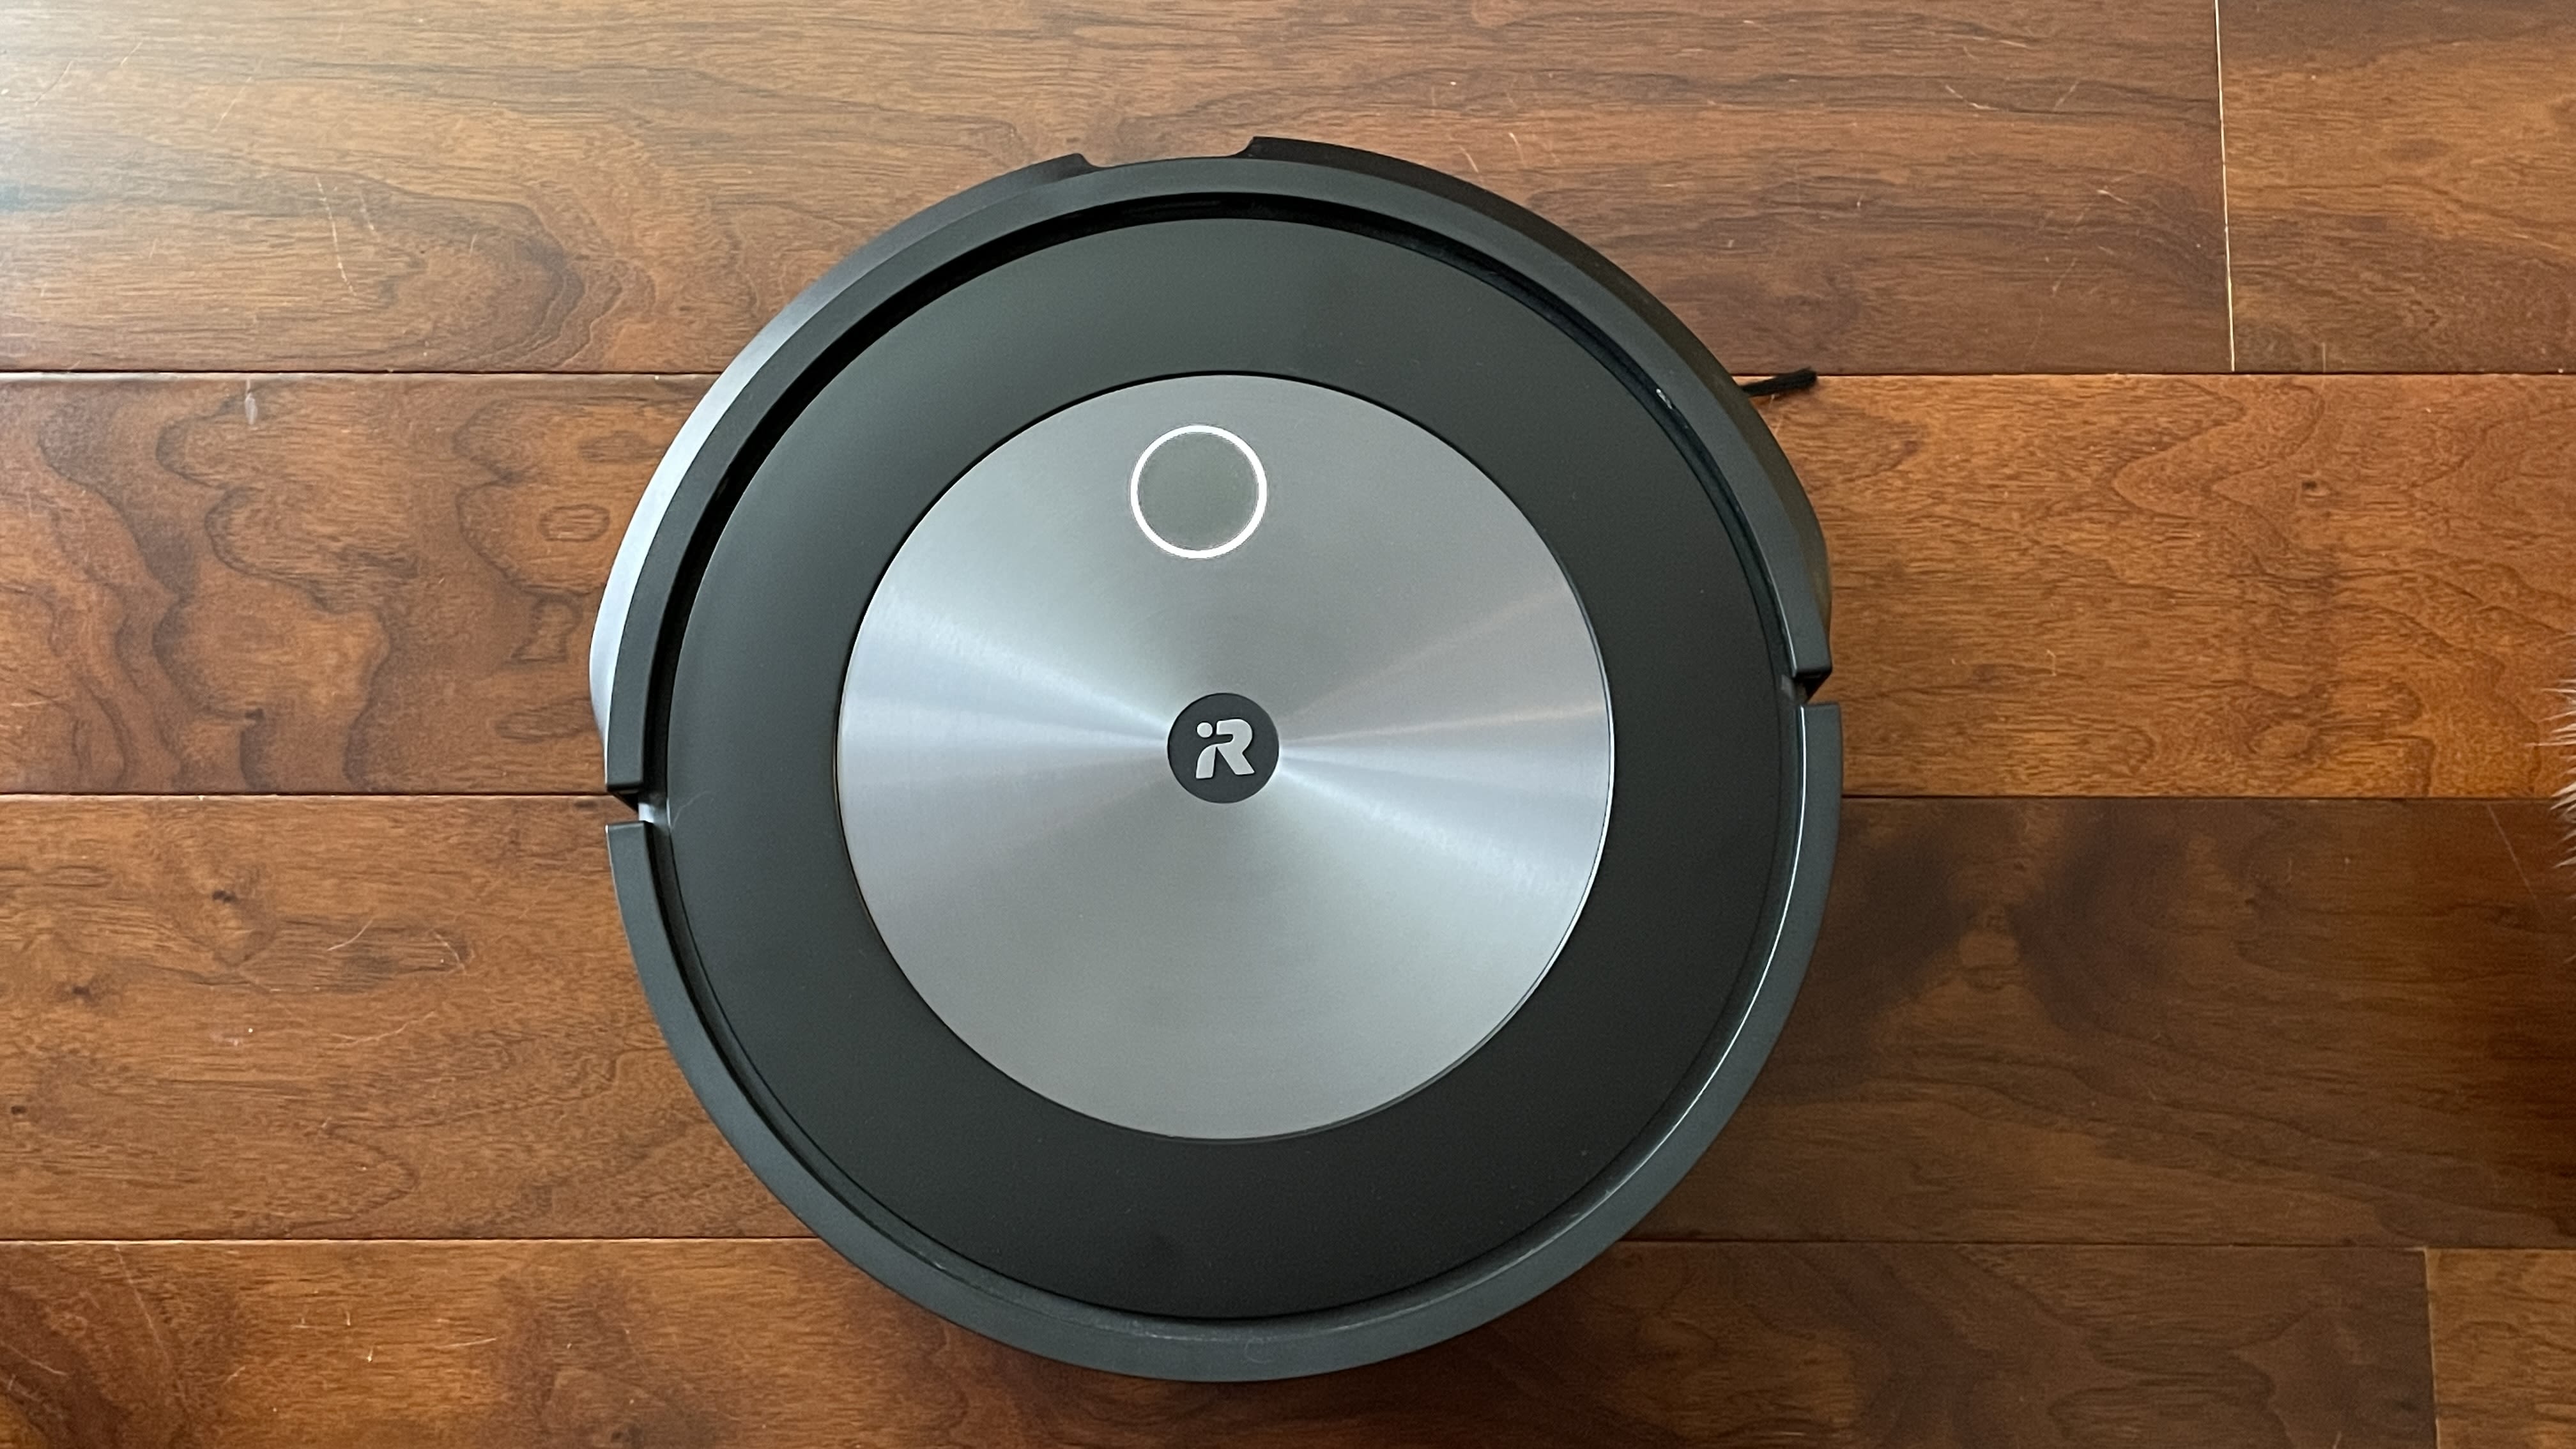 Best Robot Vacuums For Pet Hair, According To Reviews lupon.gov.ph